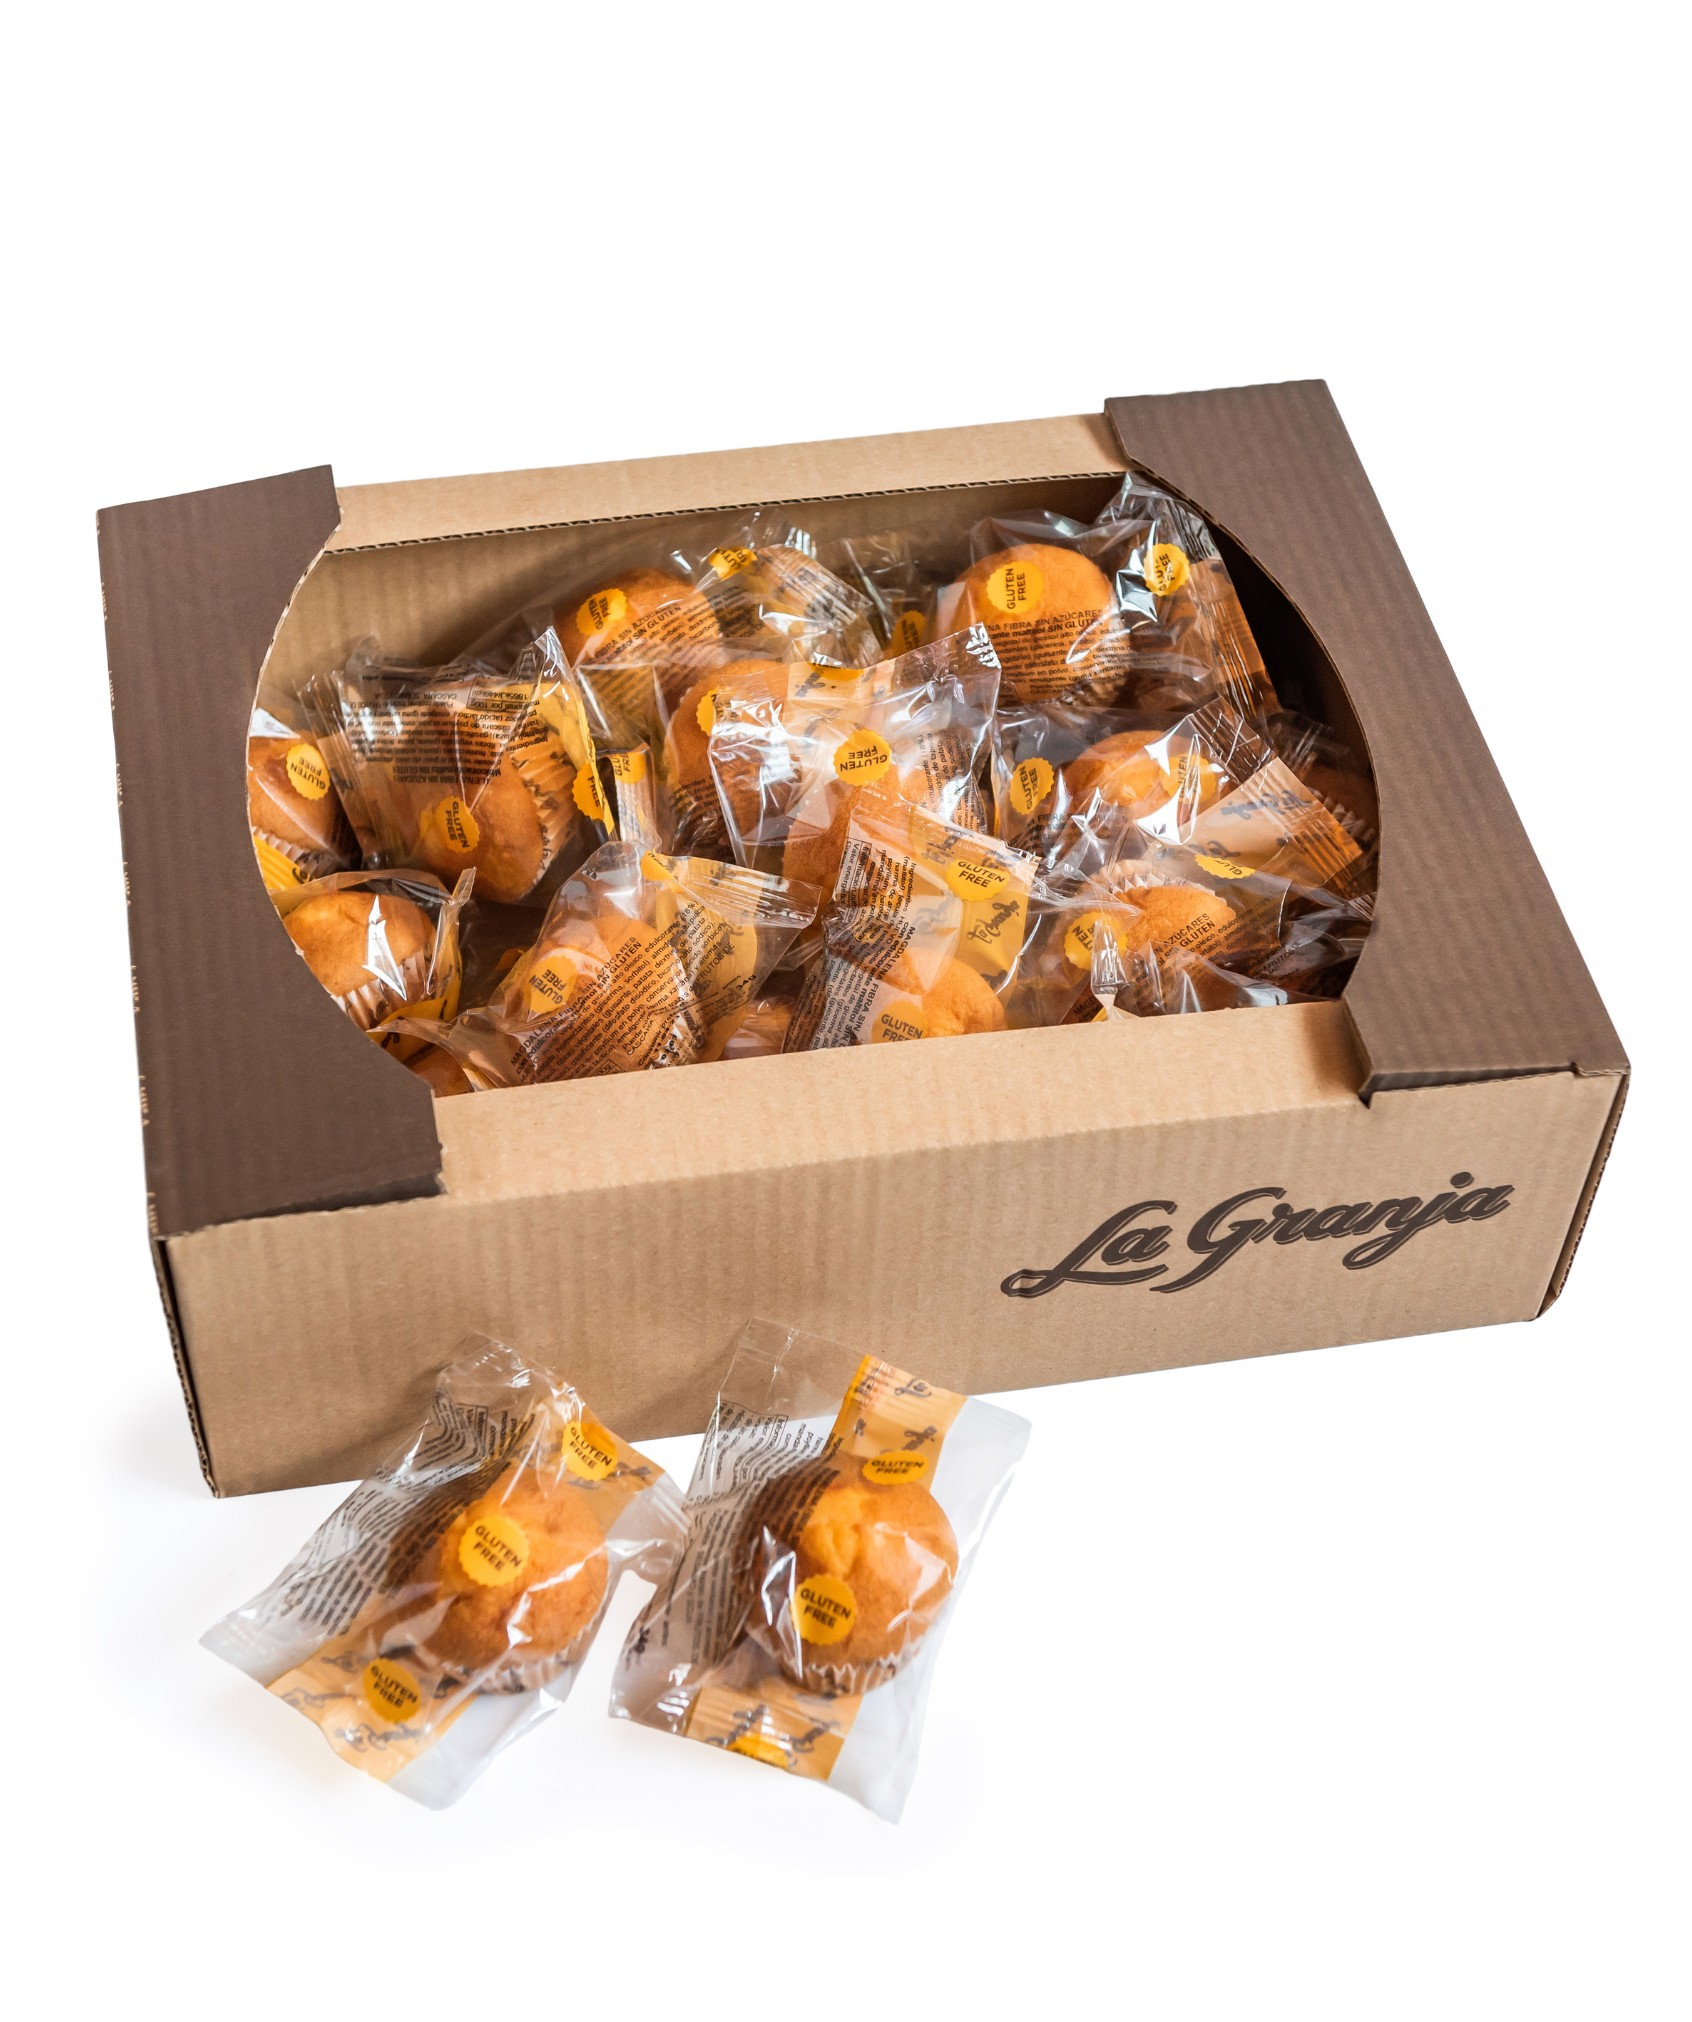 Case 1,5kg of Sugar, gluten and lactose free fibre fairy cakes with maltitol sweetener